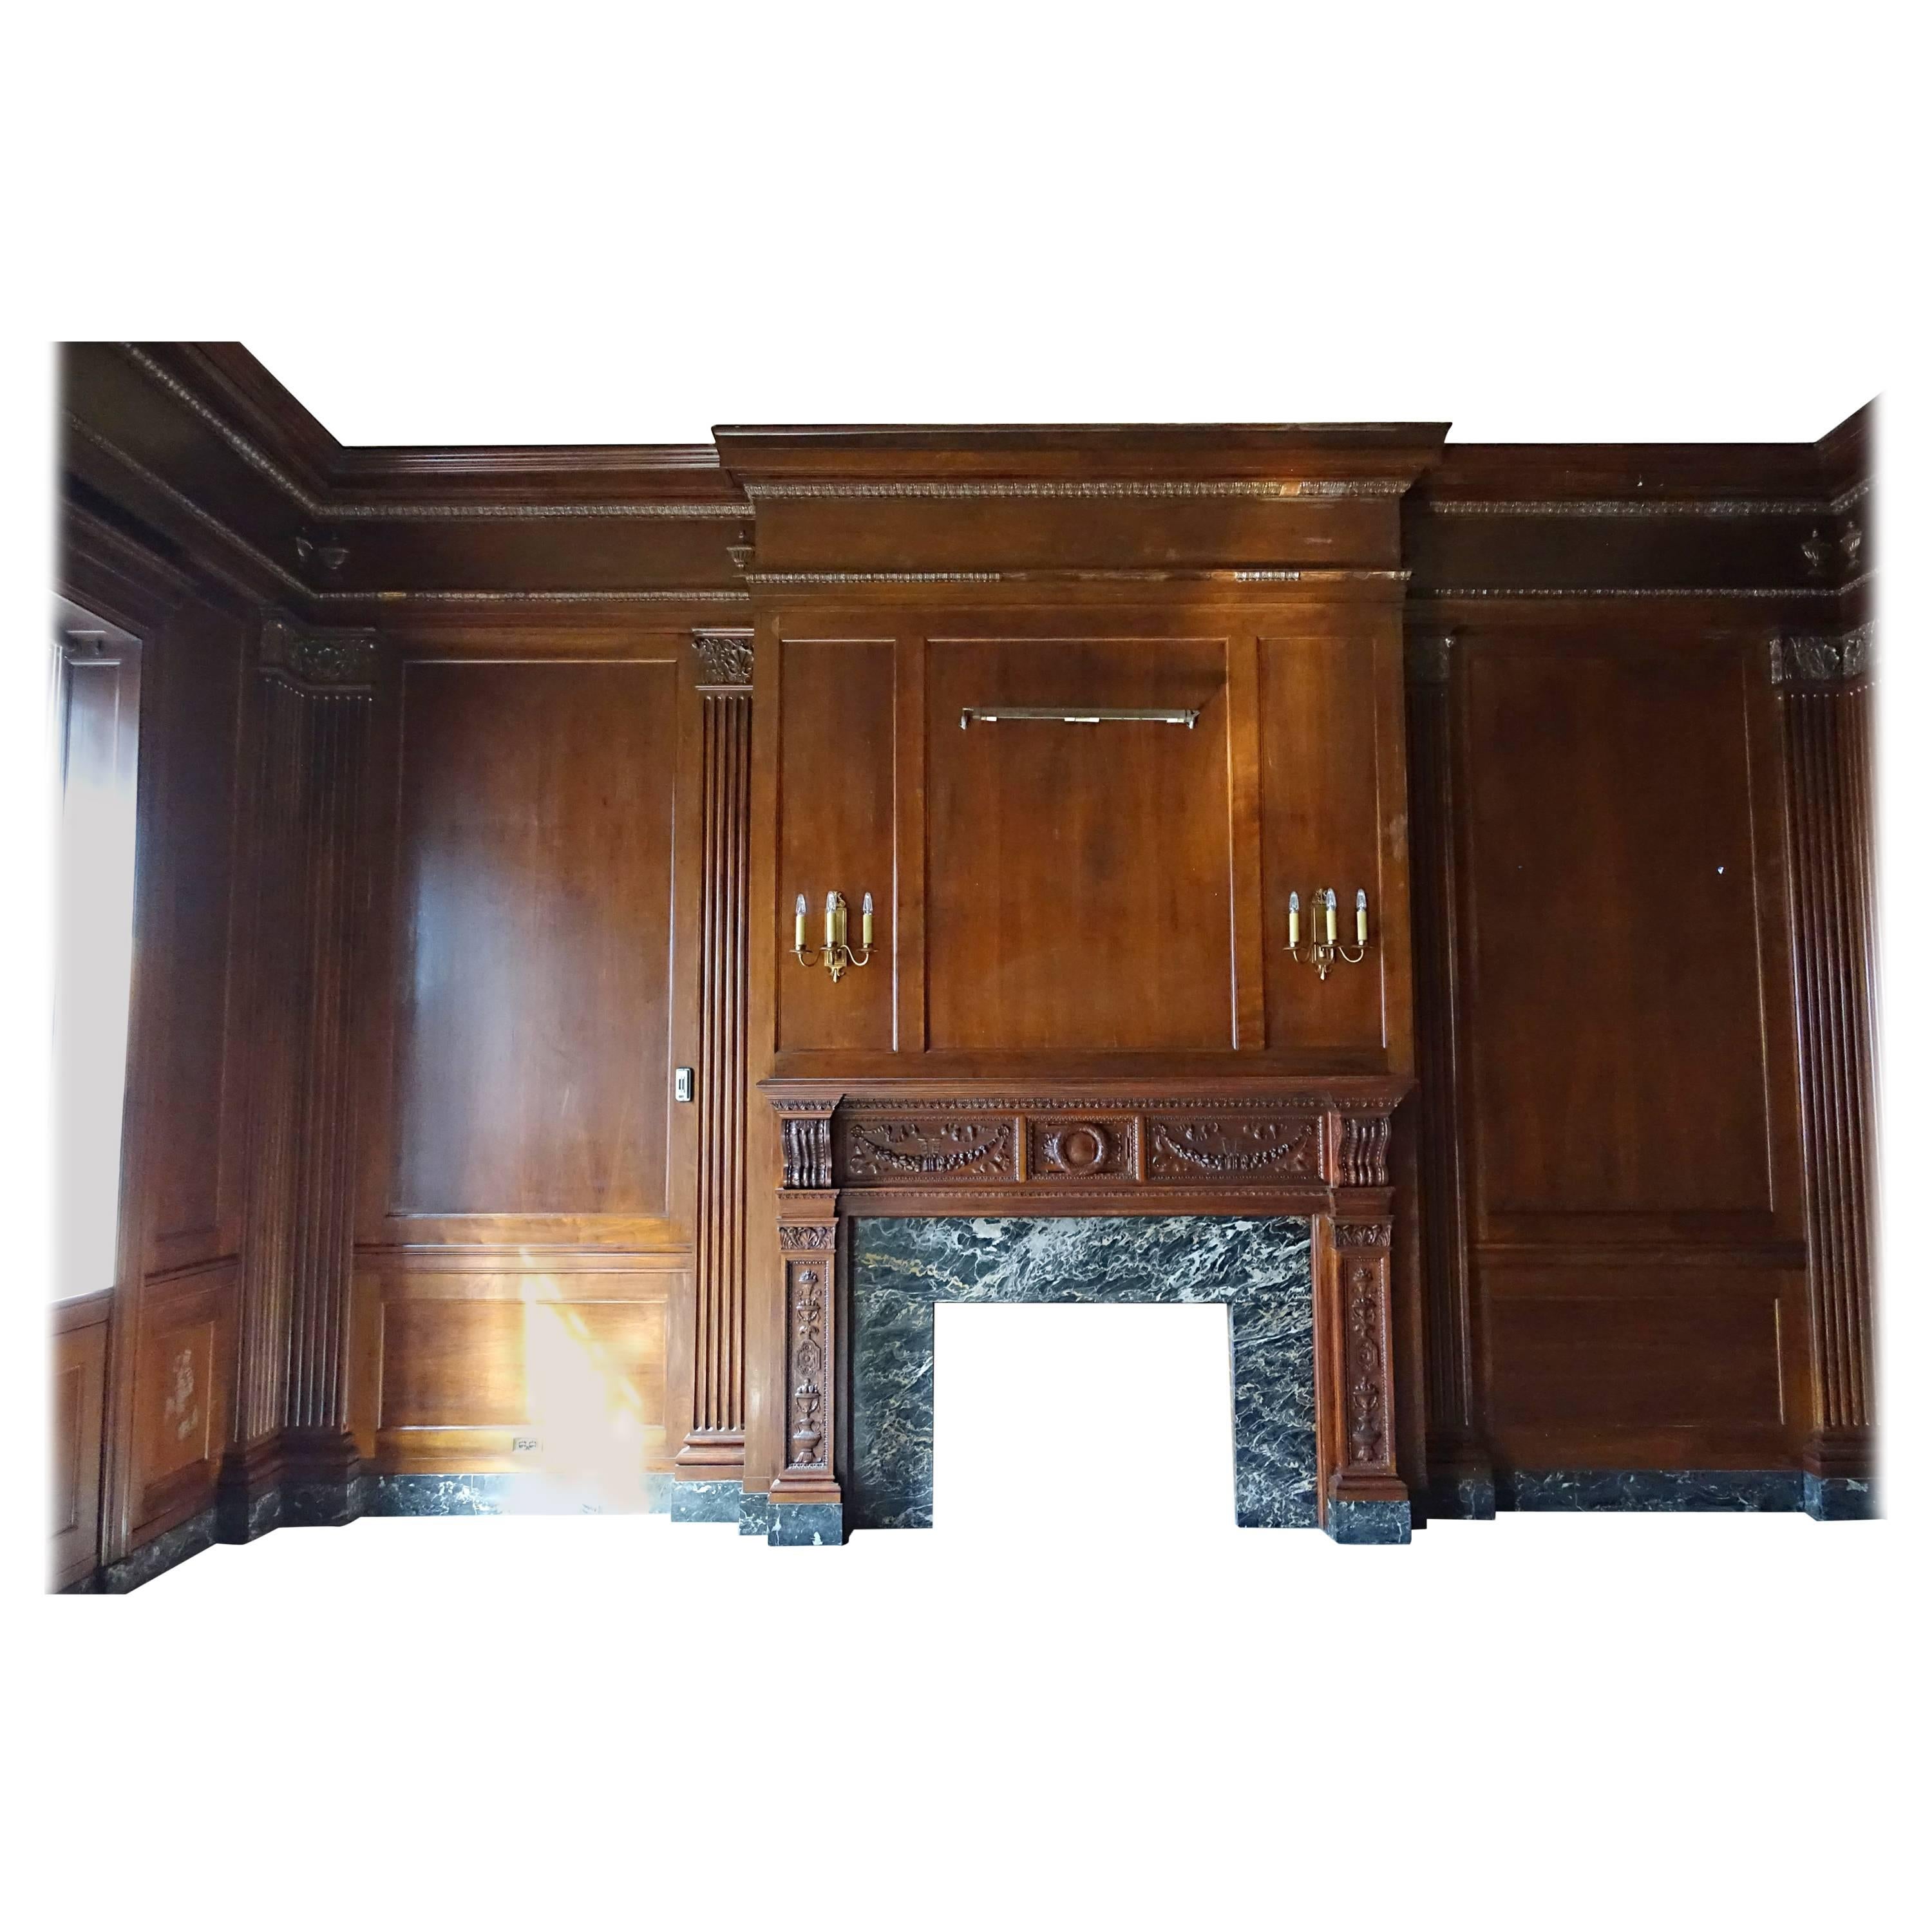 Neoclassical Walnut Panelled Room and Mantel from the Williamsburg Savings Bank